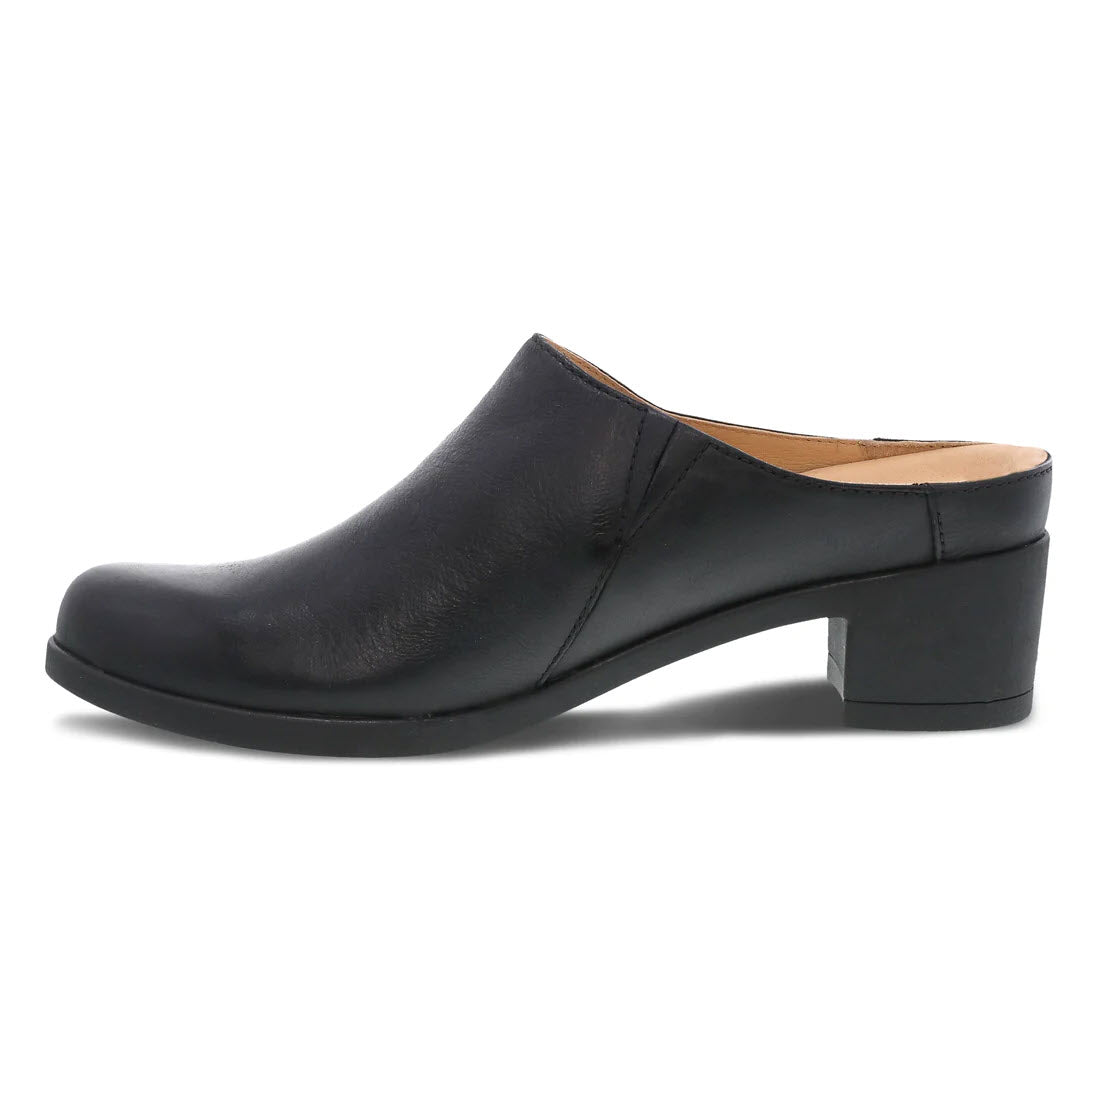 Dansko Carrie Black Burnished backless mule with a low block heel and rounded toe, displayed on a white background.